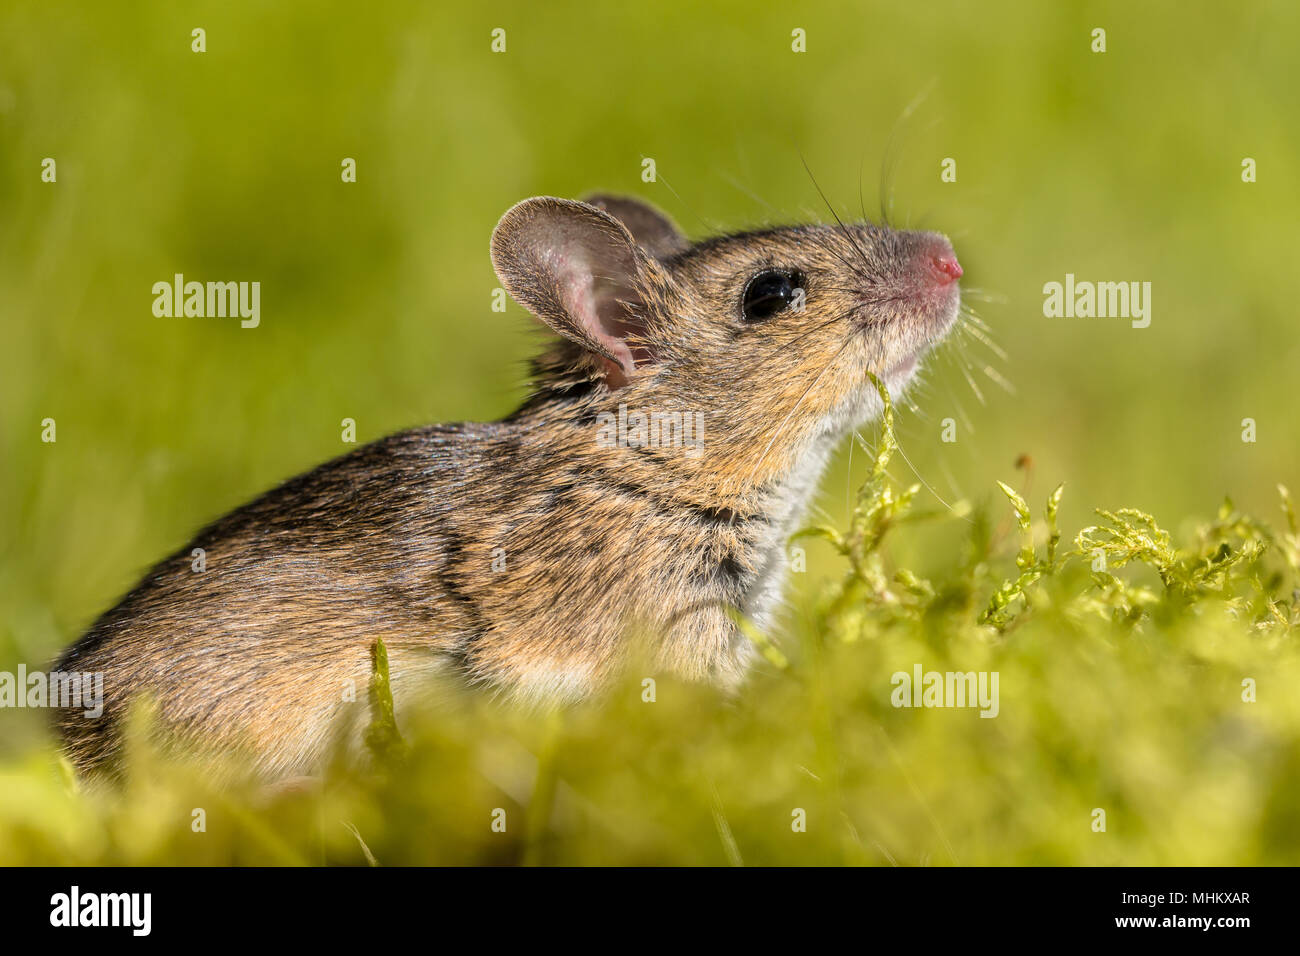 Cute looking Wood mouse (Apodemus sylvaticus) sniffing the air in green moss natural environment Stock Photo